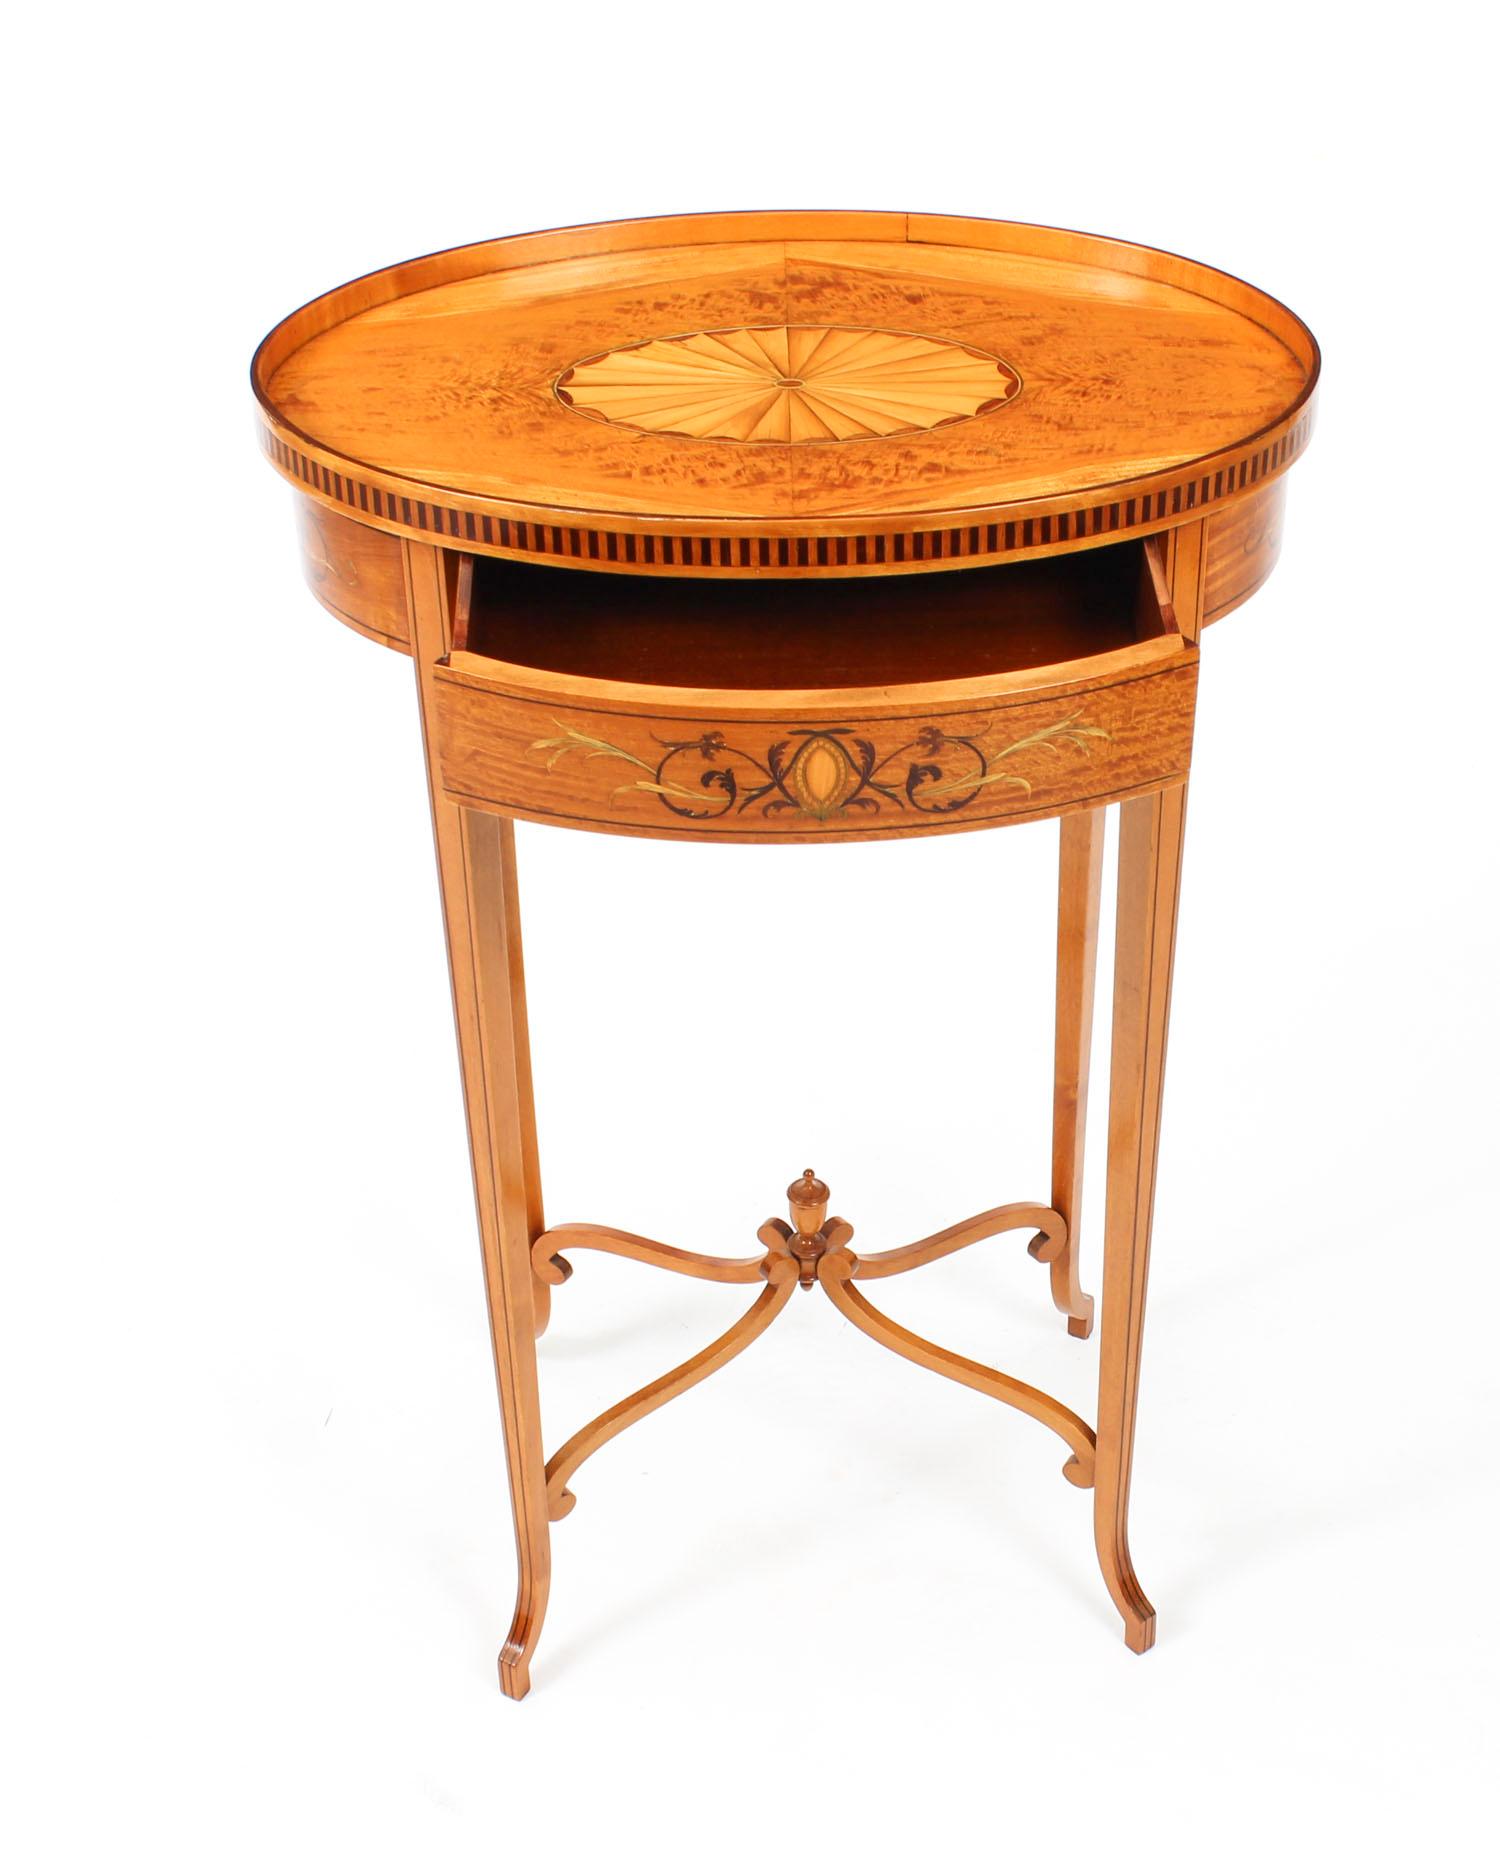 Antique Marquetry & Shell Inlaid Satinwood Oval Occasional Table, 19th Century 2